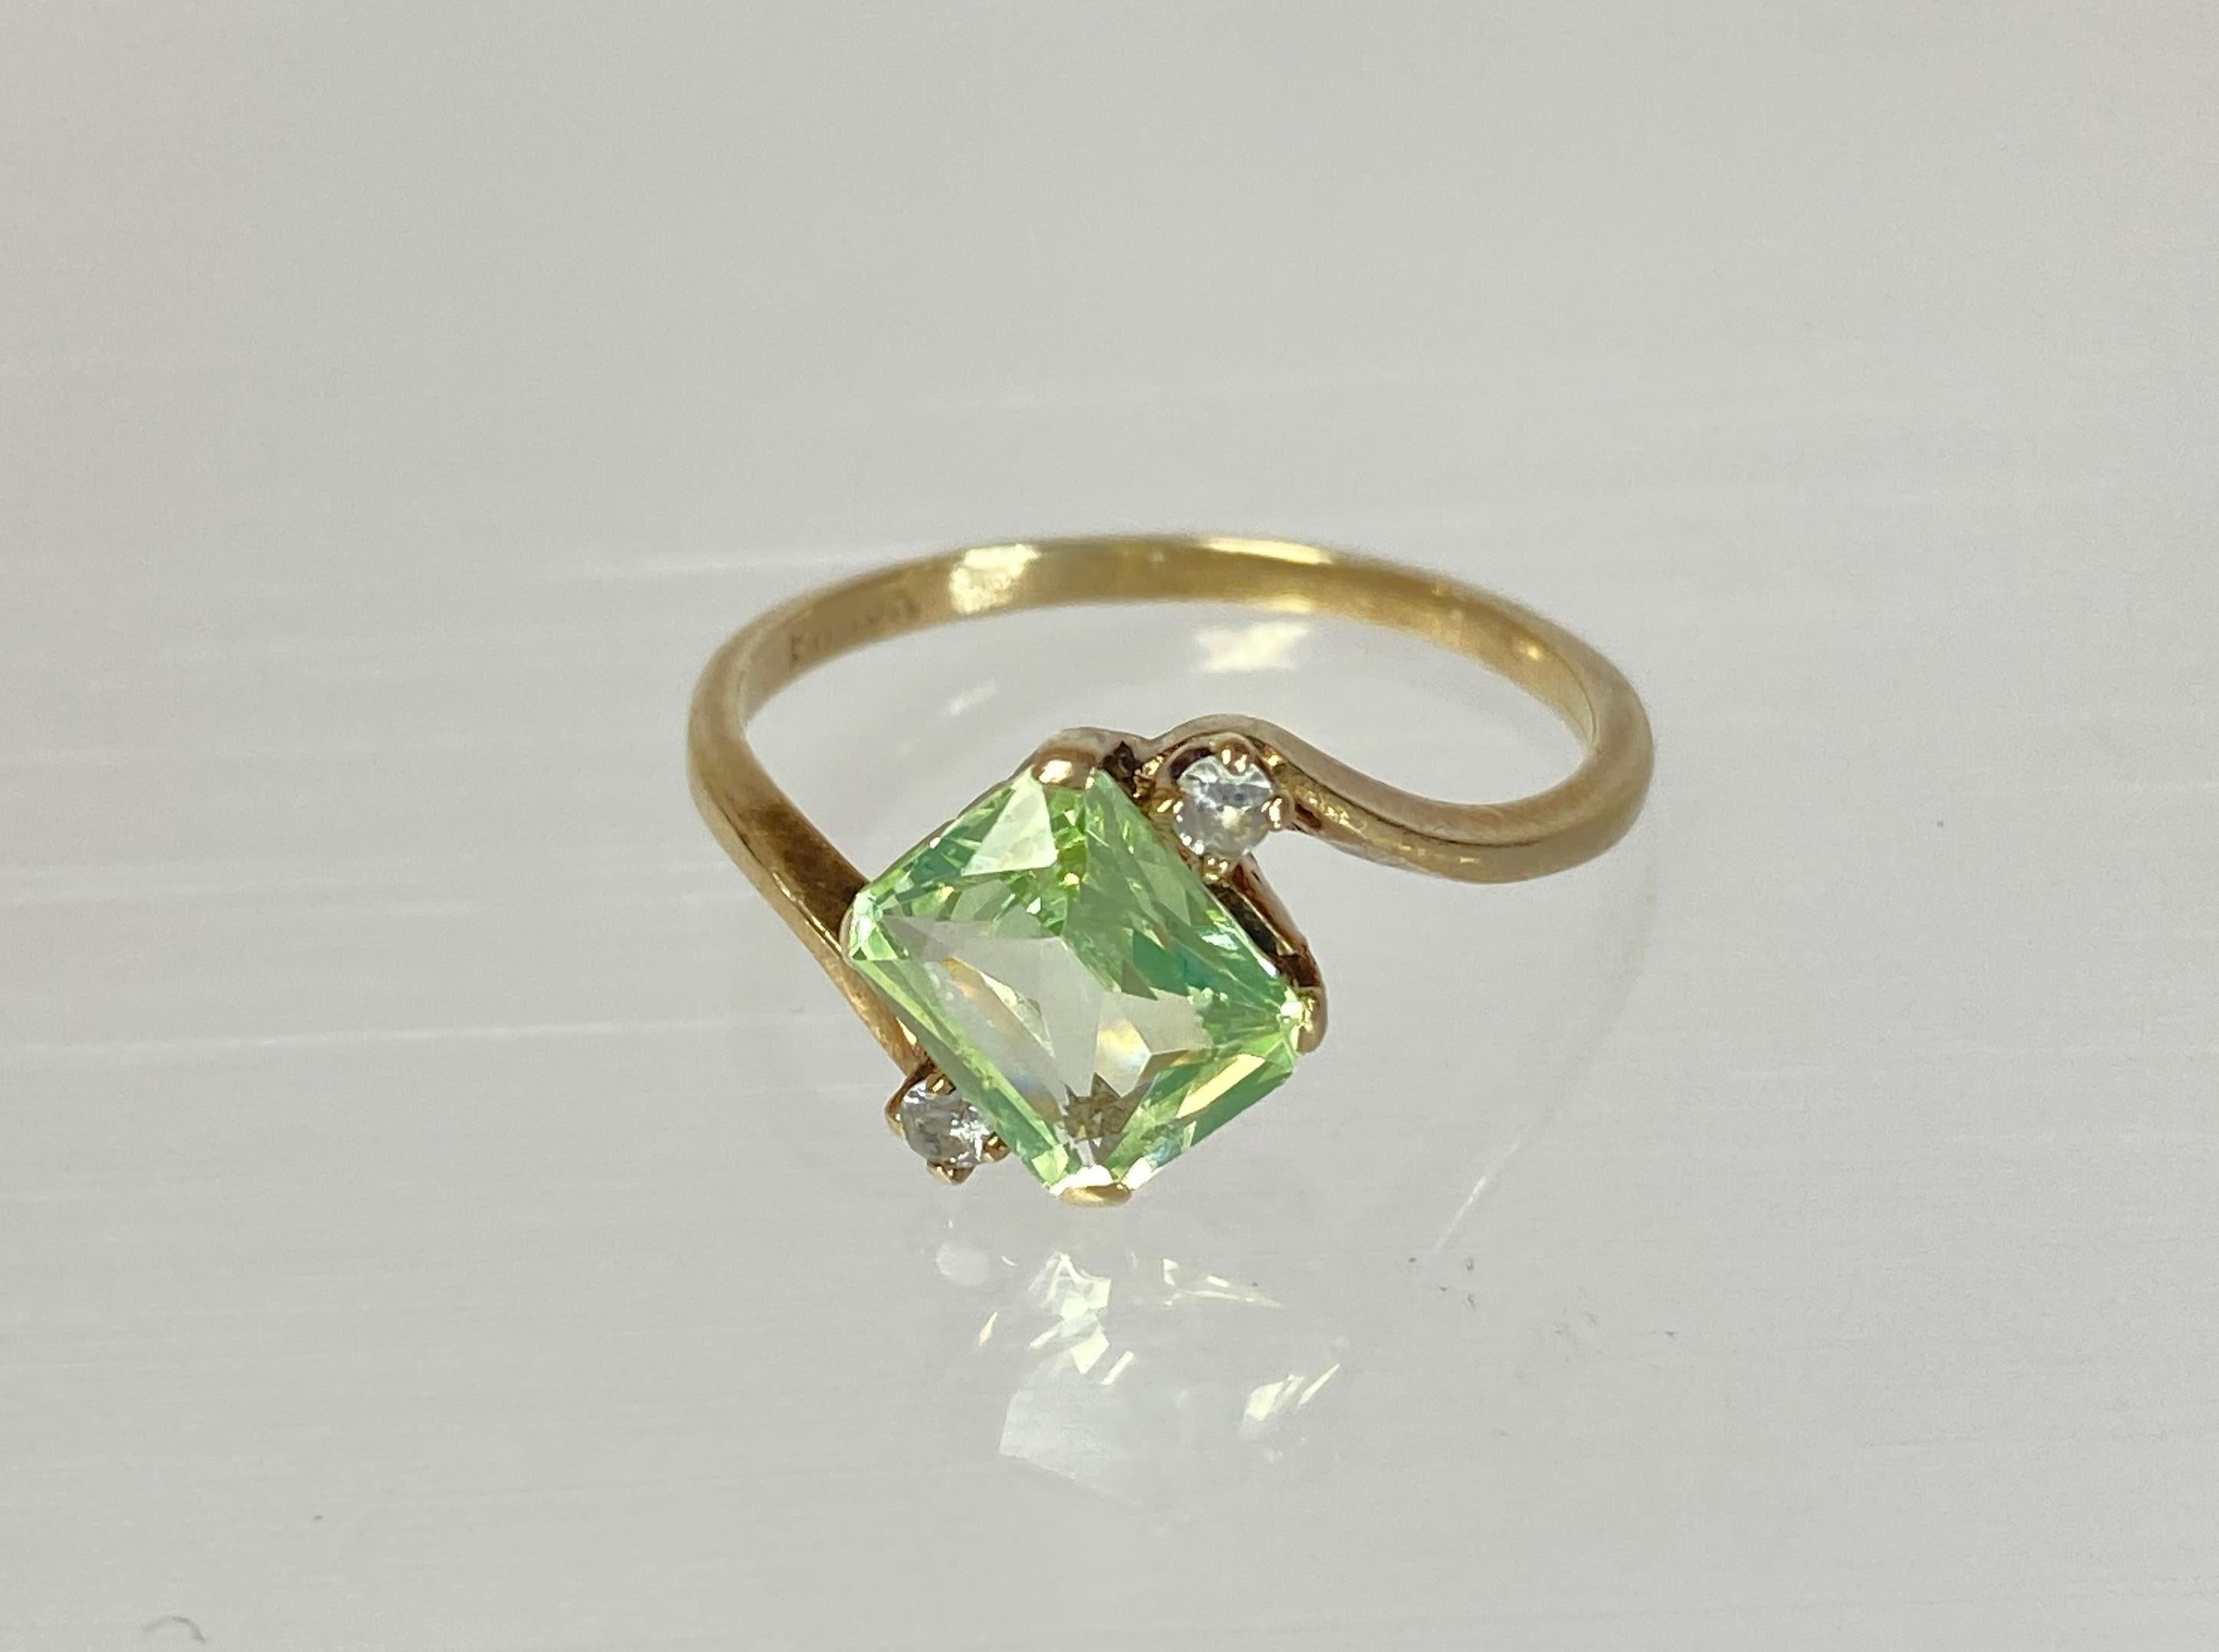 Women's or Men's 10K Yellow Gold Old Fashioned Emerald Cut Green Beryl Solitaire Ring Size 8.25